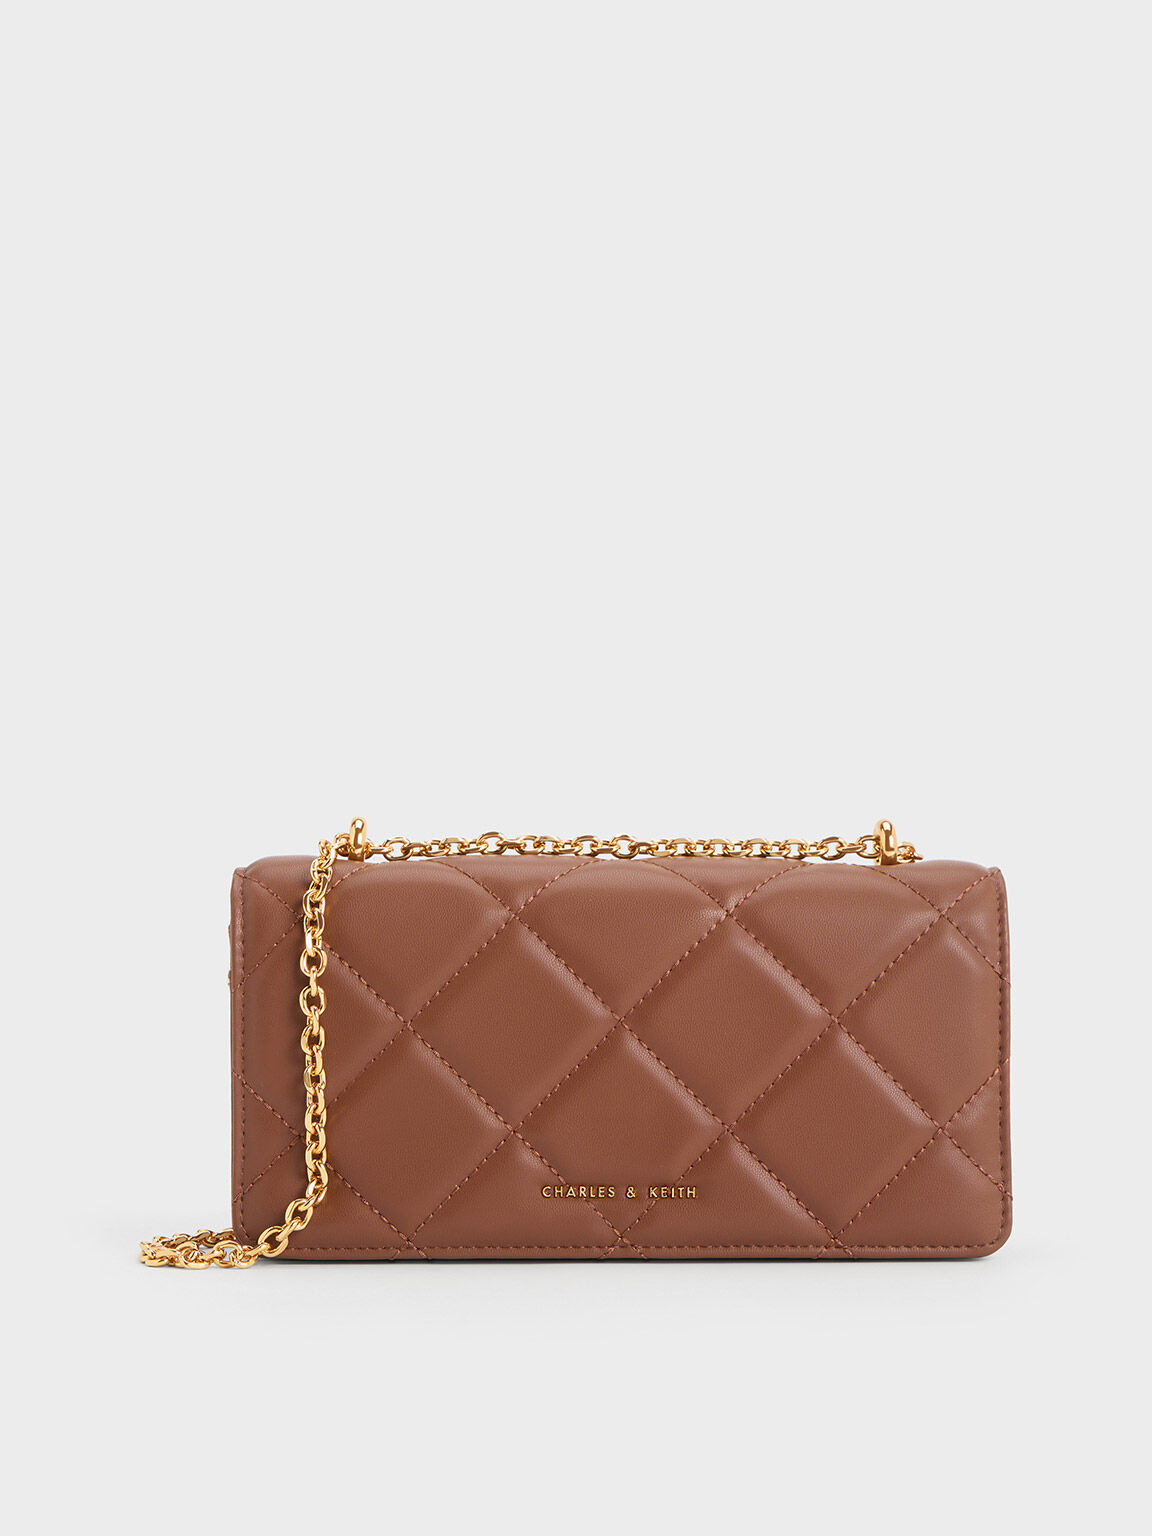 Chocolate Chain Handle Shoulder Bag - CHARLES & KEITH IN